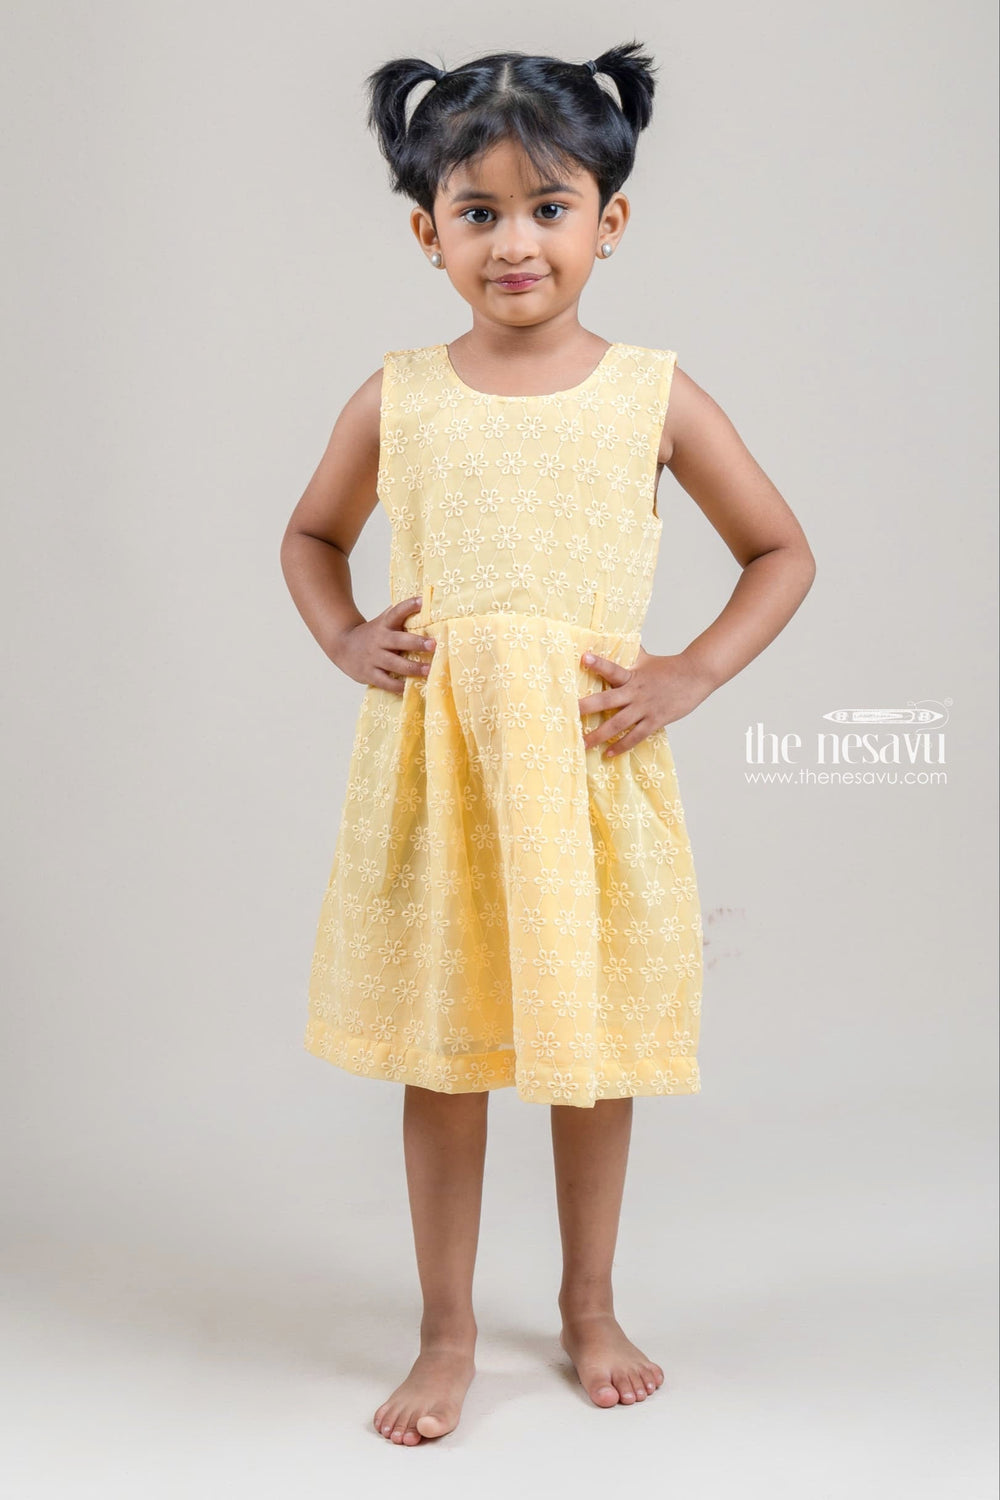 The Nesavu Baby Fancy Frock Cute Floral Embroidered Yellow Baby Cotton Frock With Hand Crafted Belt Nesavu Floral Design Frock For Girl KIds | Baby Cotton Dresses | The Nesavu